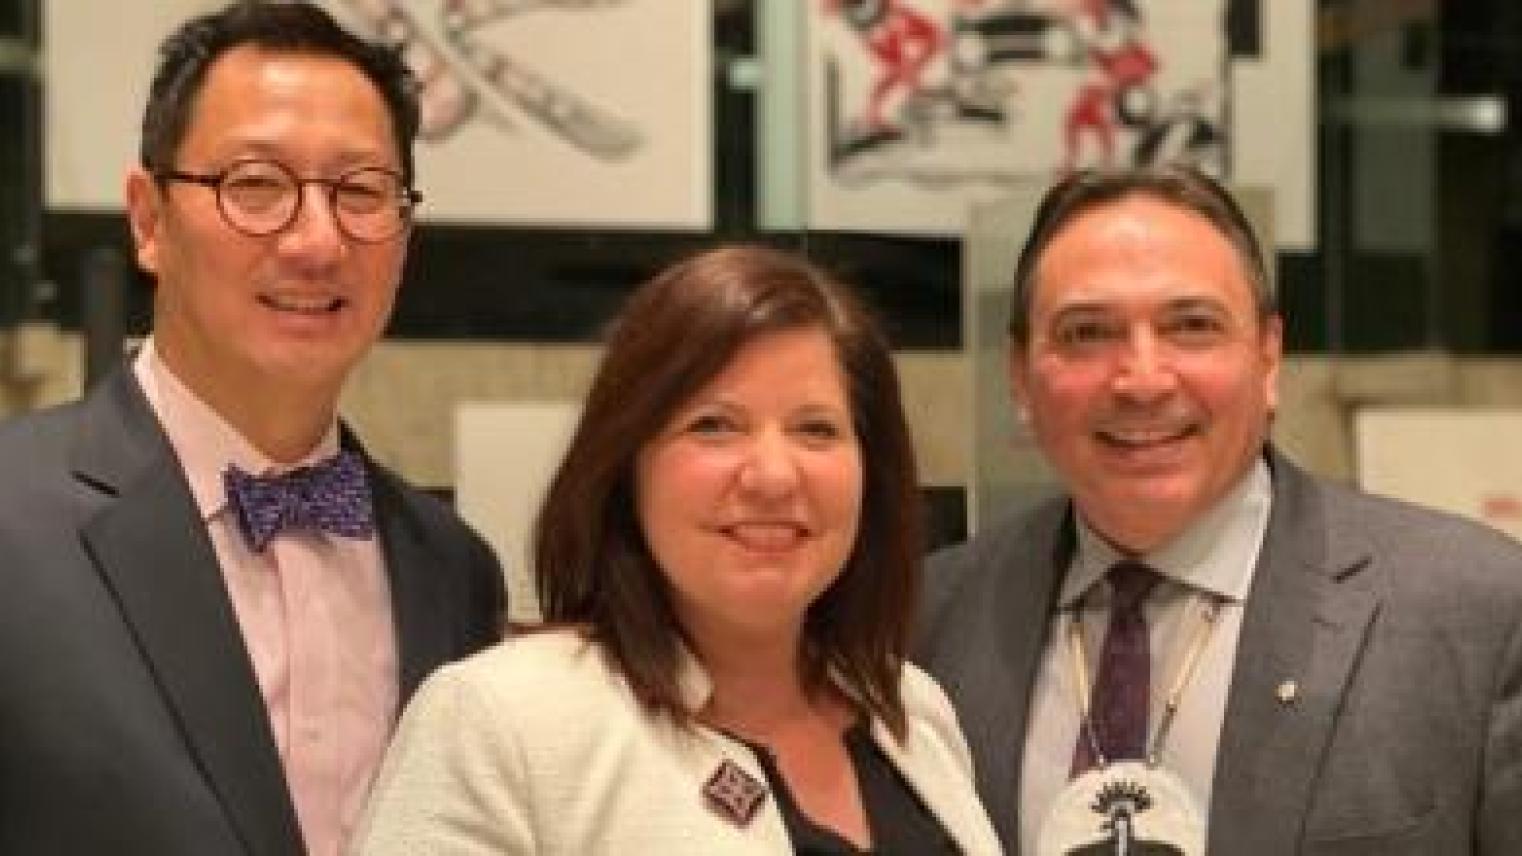 Image credit: Former UBC President Prof. Santa J. Ono, Dr. Sheryl Lightfoot, Senior Advisor to the President on Indigenous Affairs, and Assembly of First Nations National Chief Perry Bellegarde | UBC (2020).